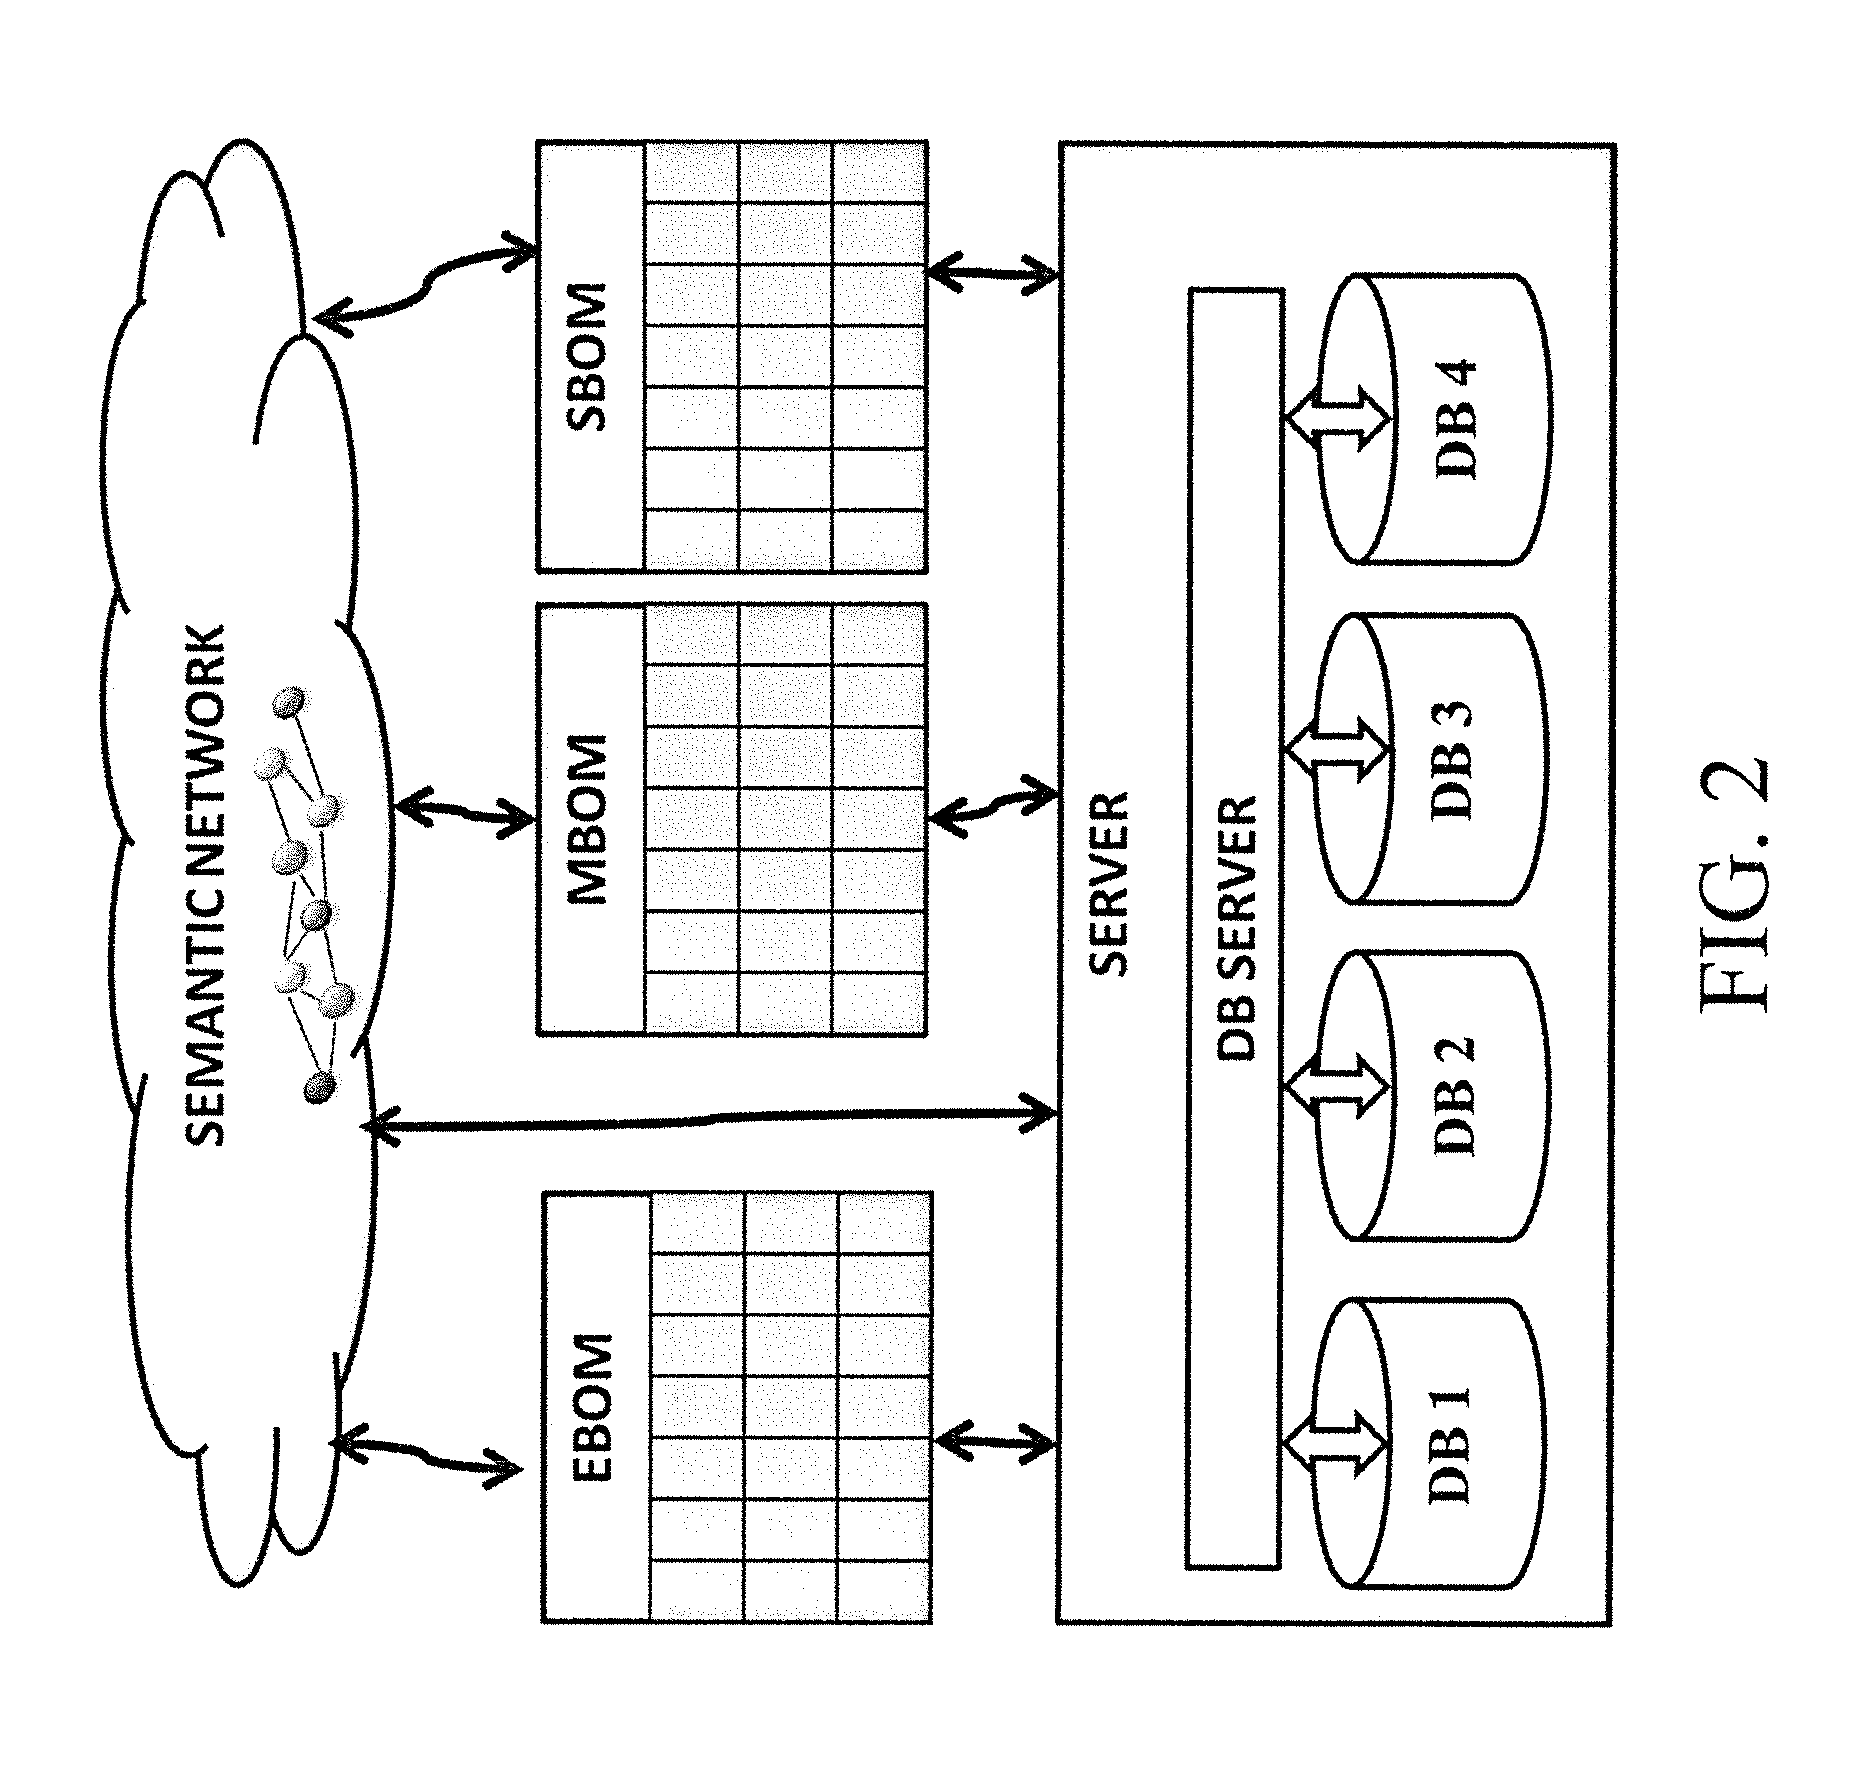 Artificial intelligence system and method for processing multilevel bills of materials